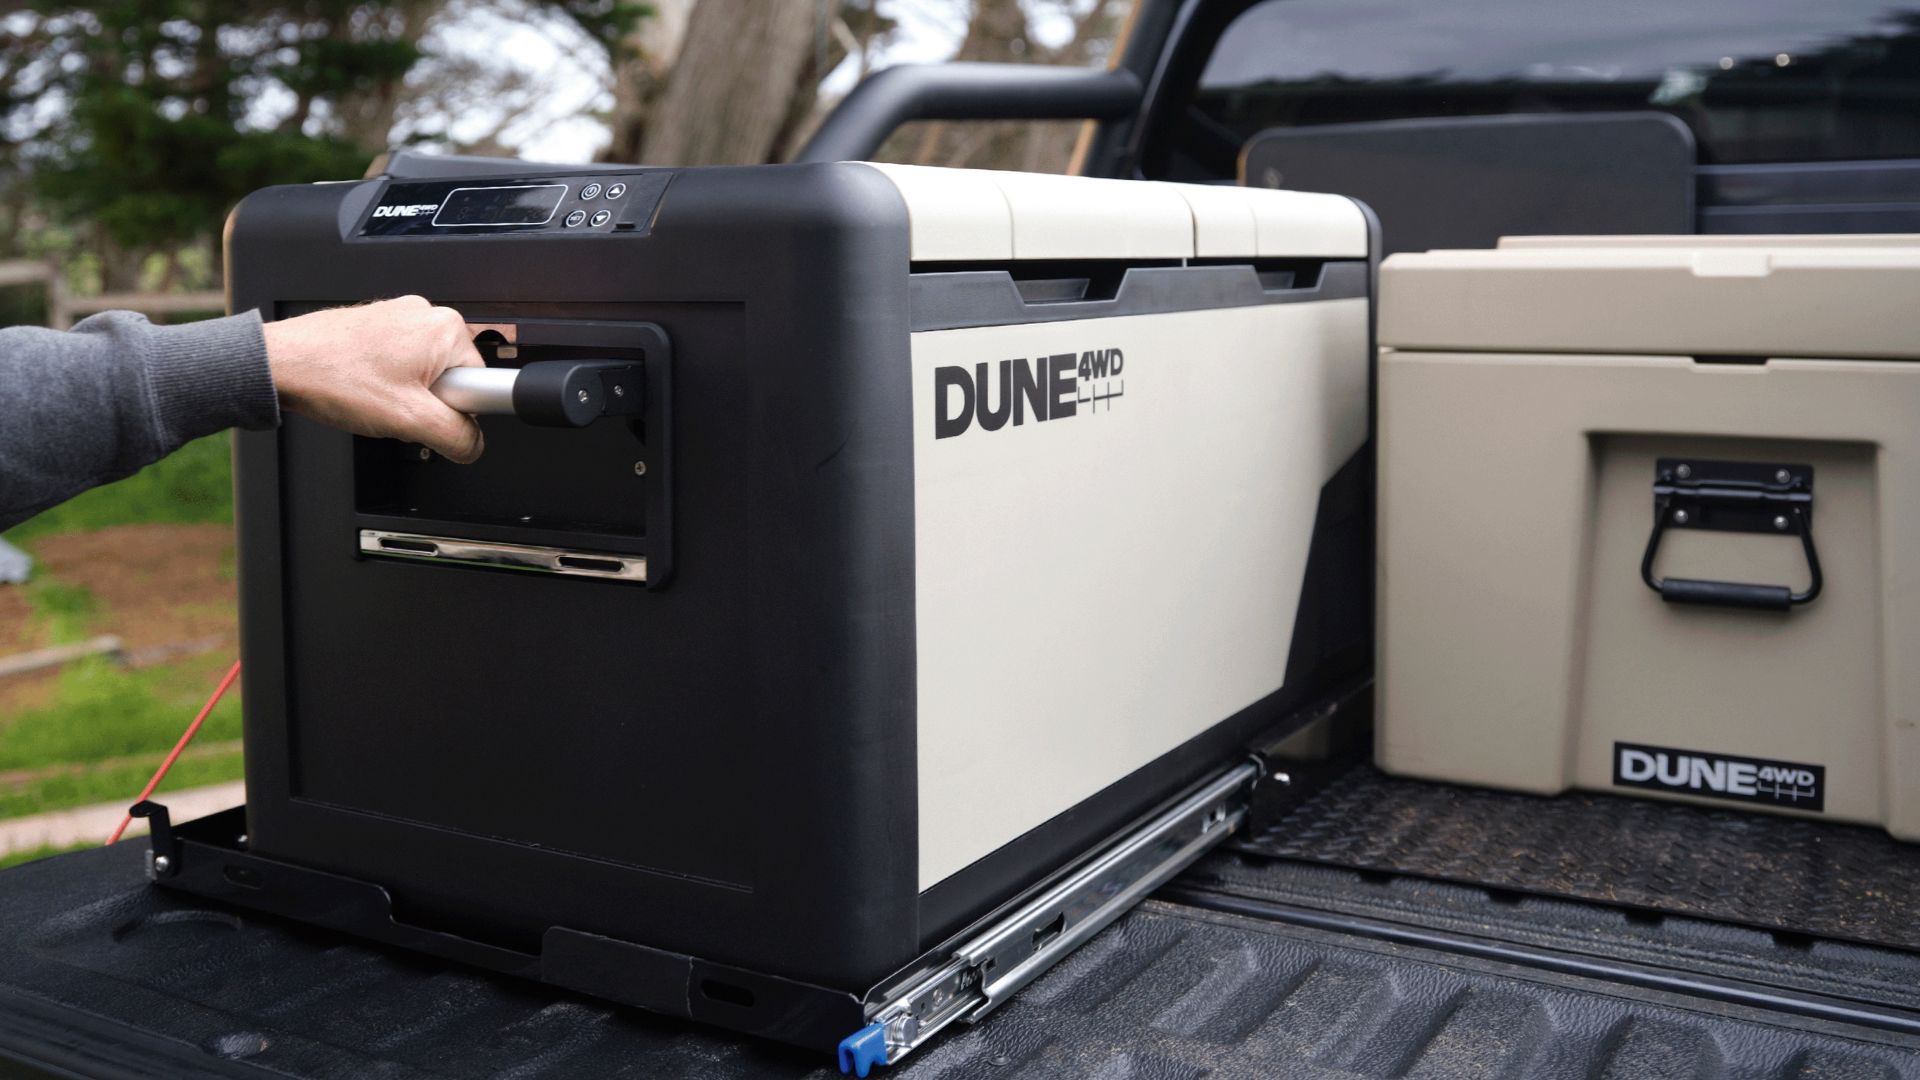 The new Dune 4WD 45L and 75L Fridge/Freezers can be connected to a Bluetooth app